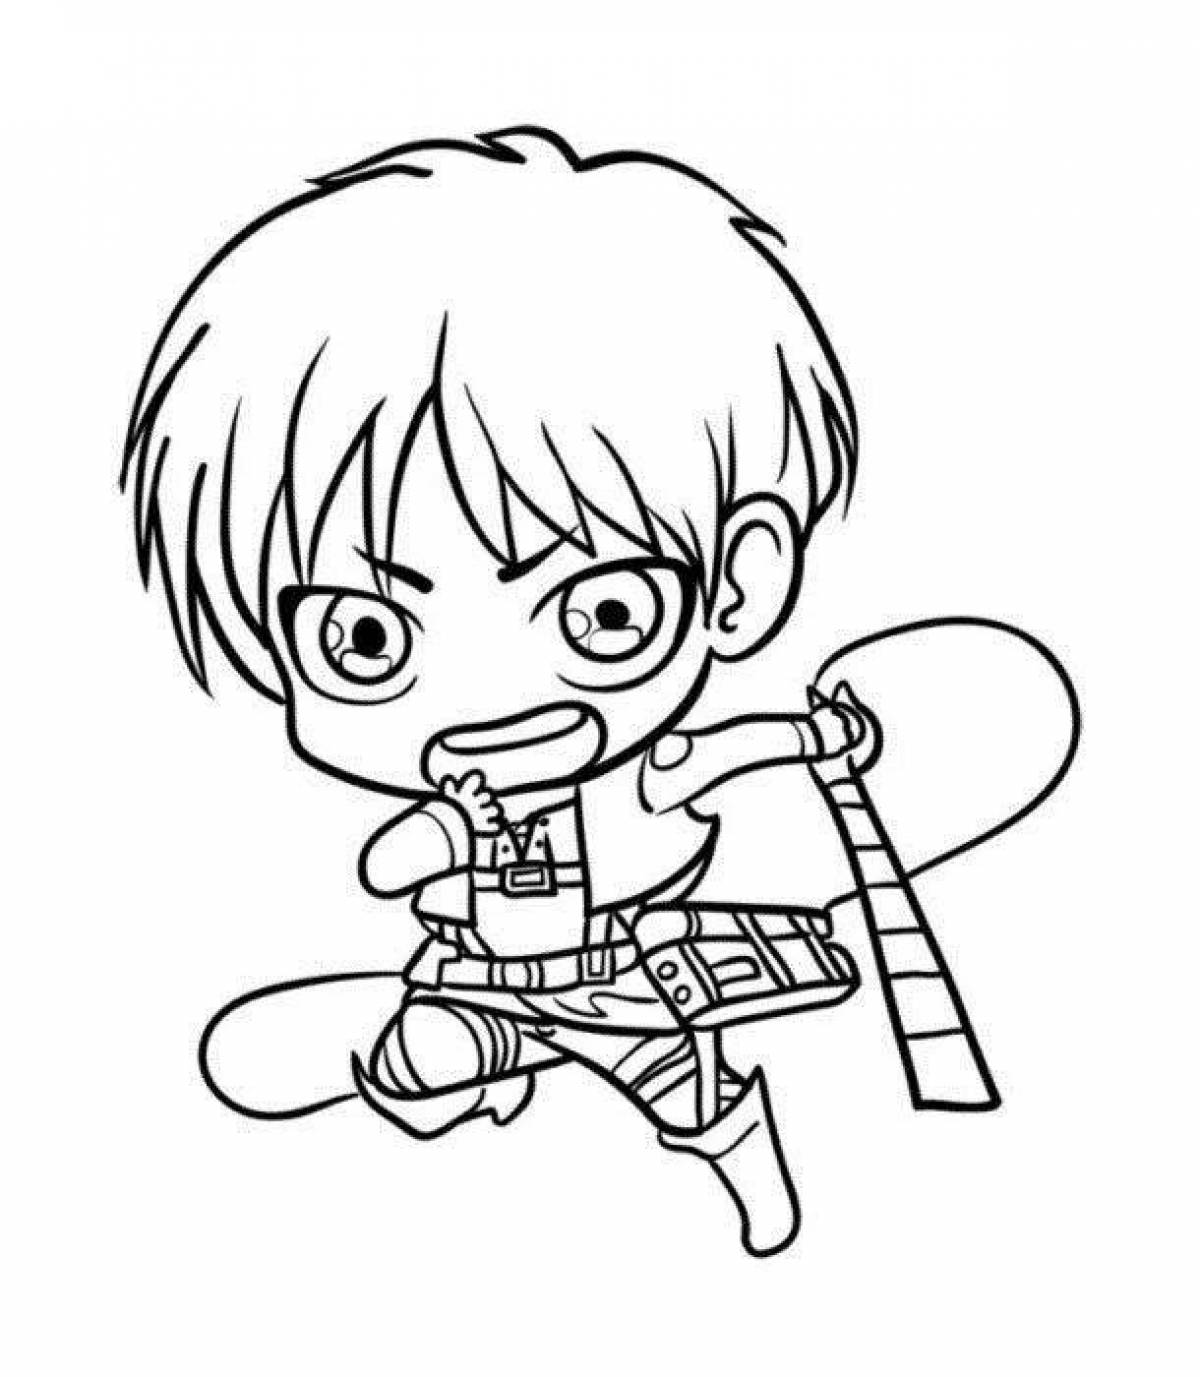 Deluxe attack on titan anime coloring book